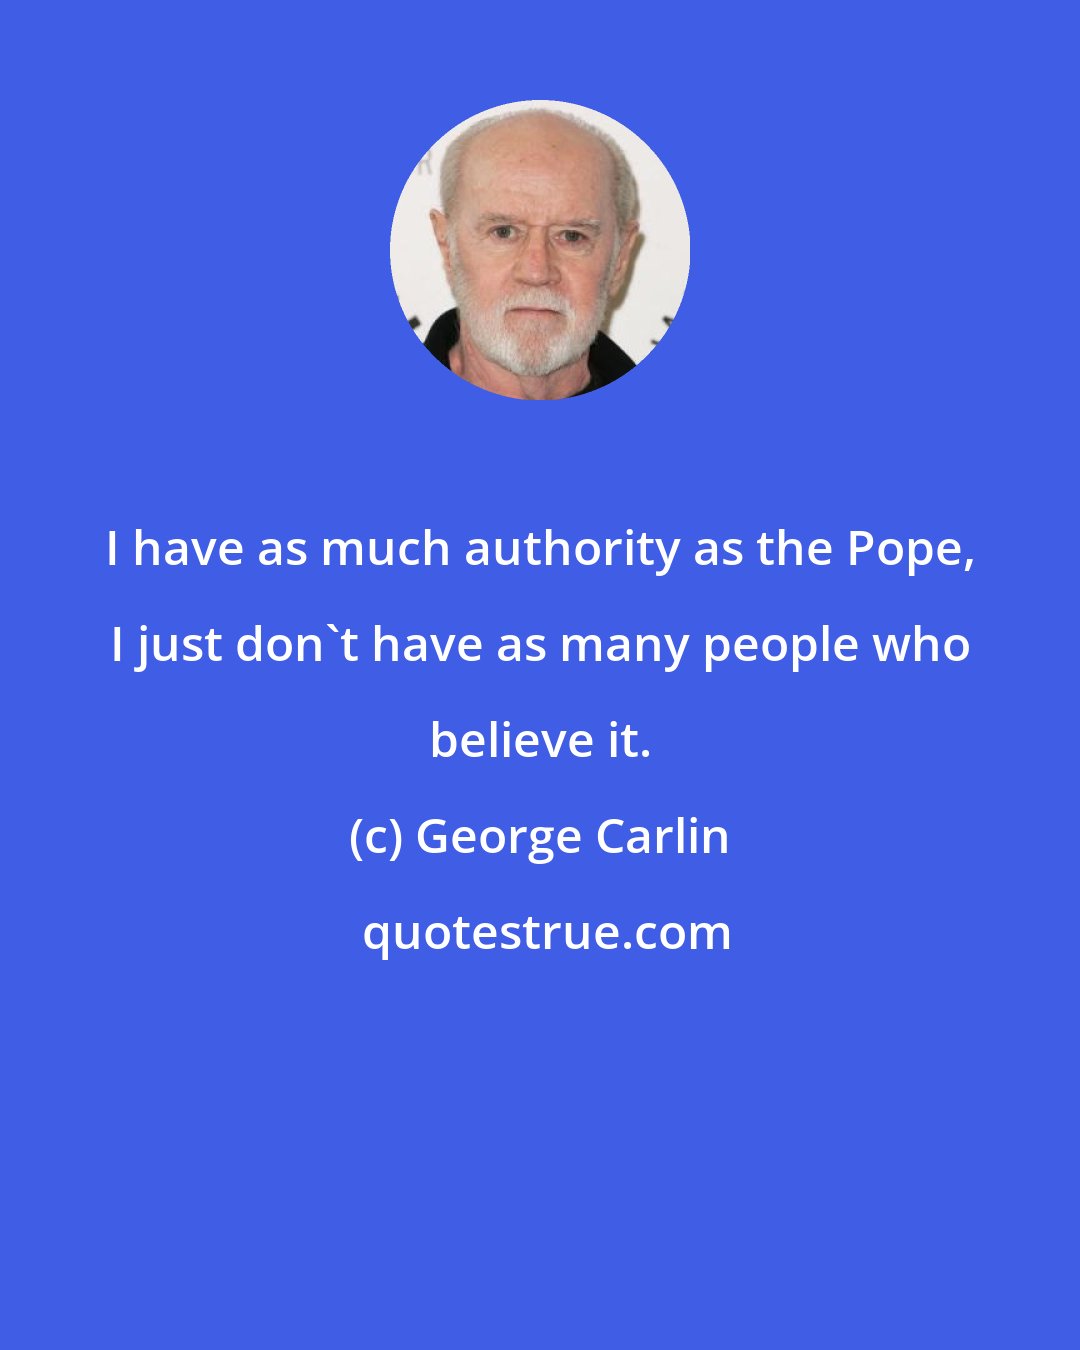 George Carlin: I have as much authority as the Pope, I just don't have as many people who believe it.